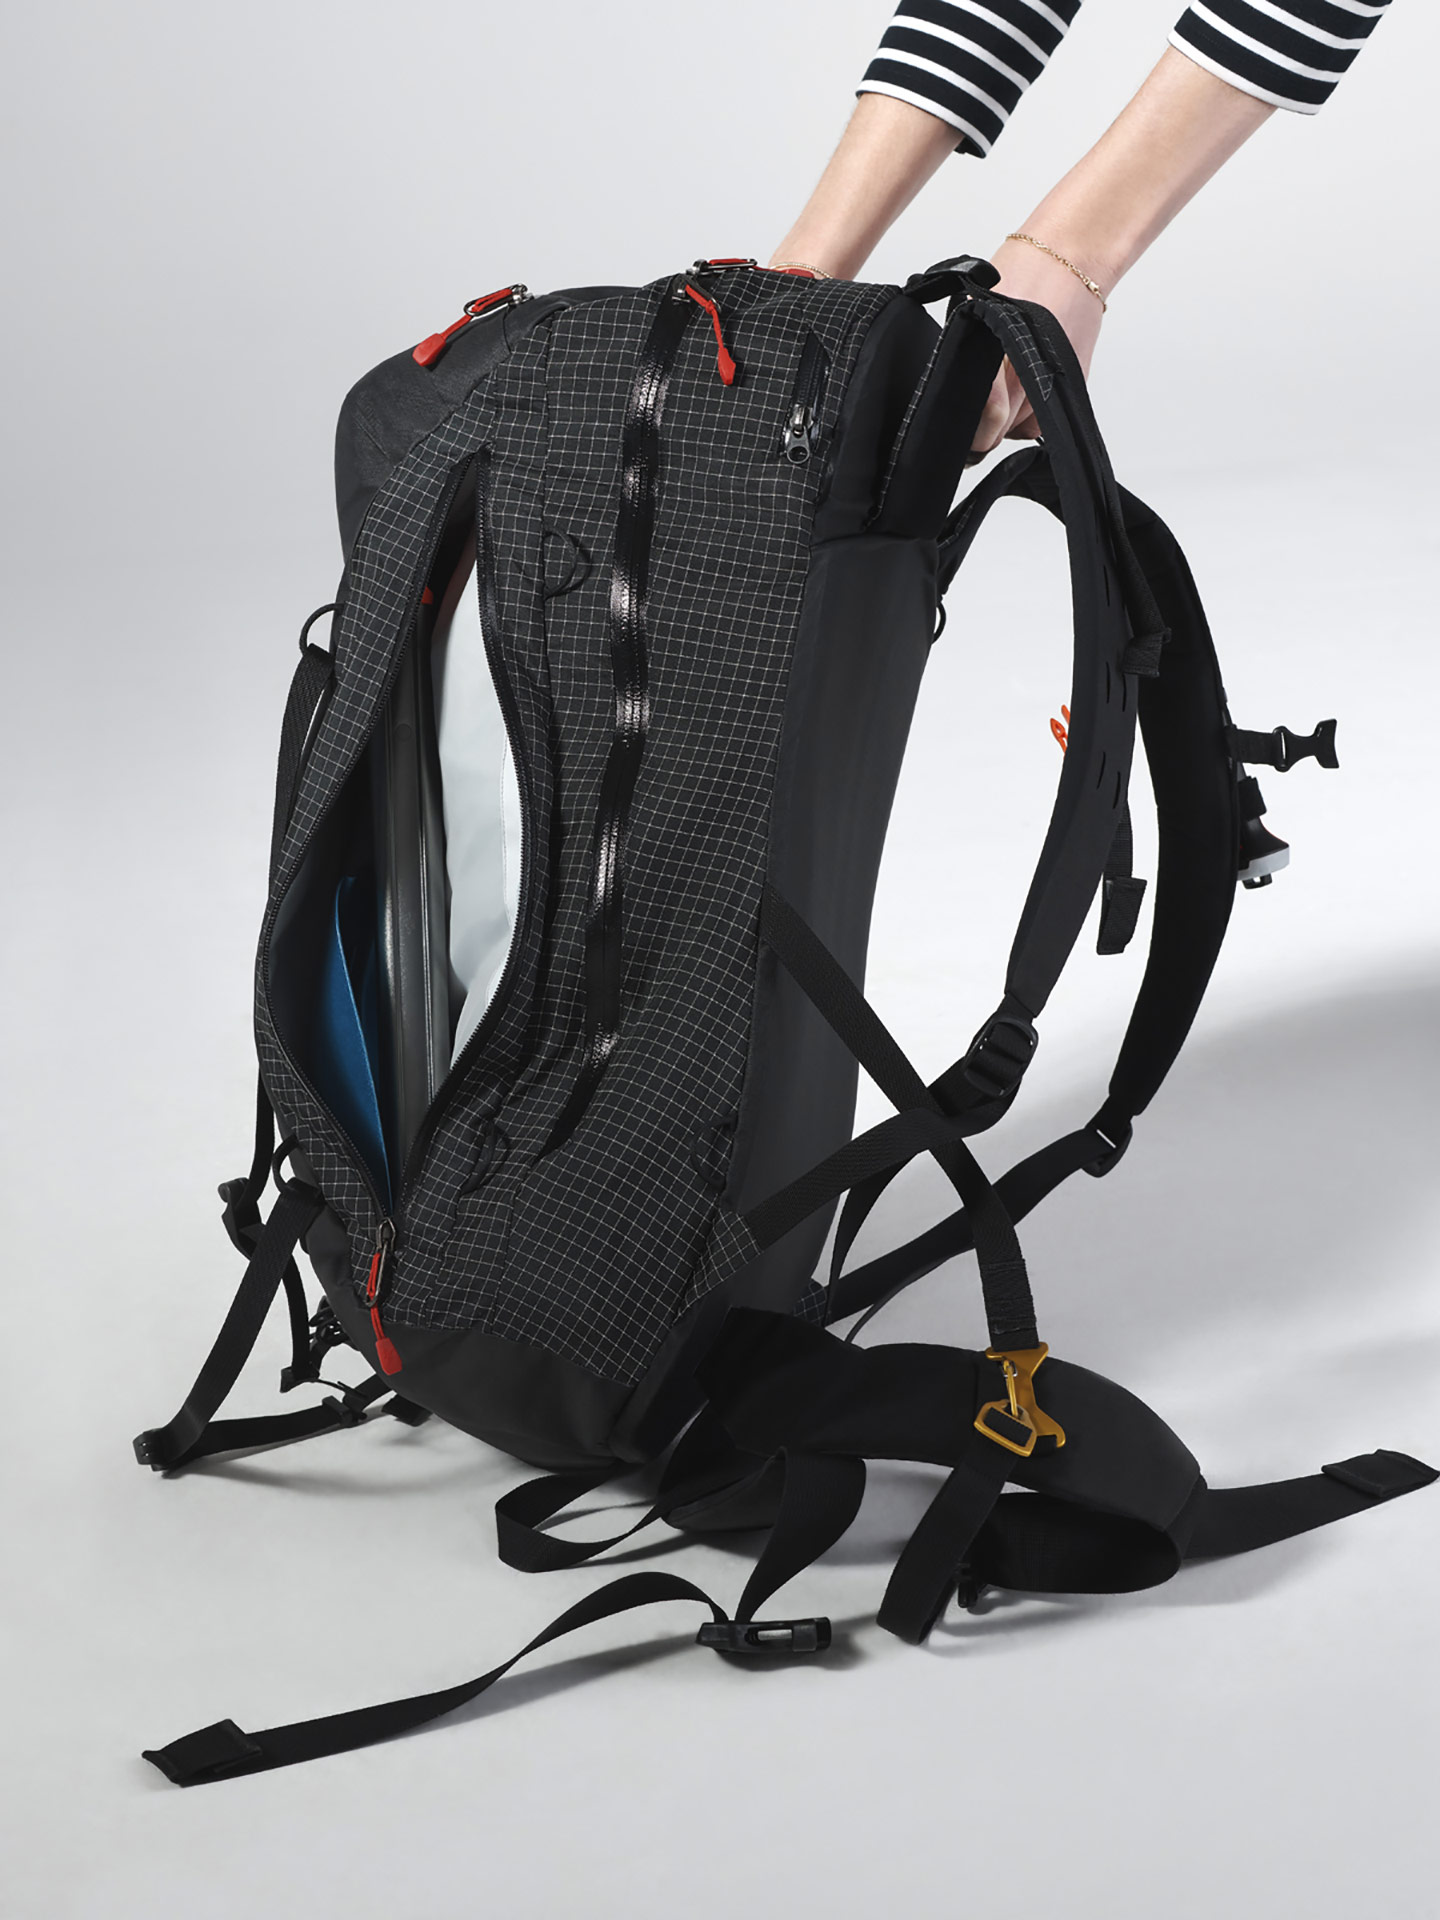 32 liter LiTRIC avalanche airbag from Arcteryx